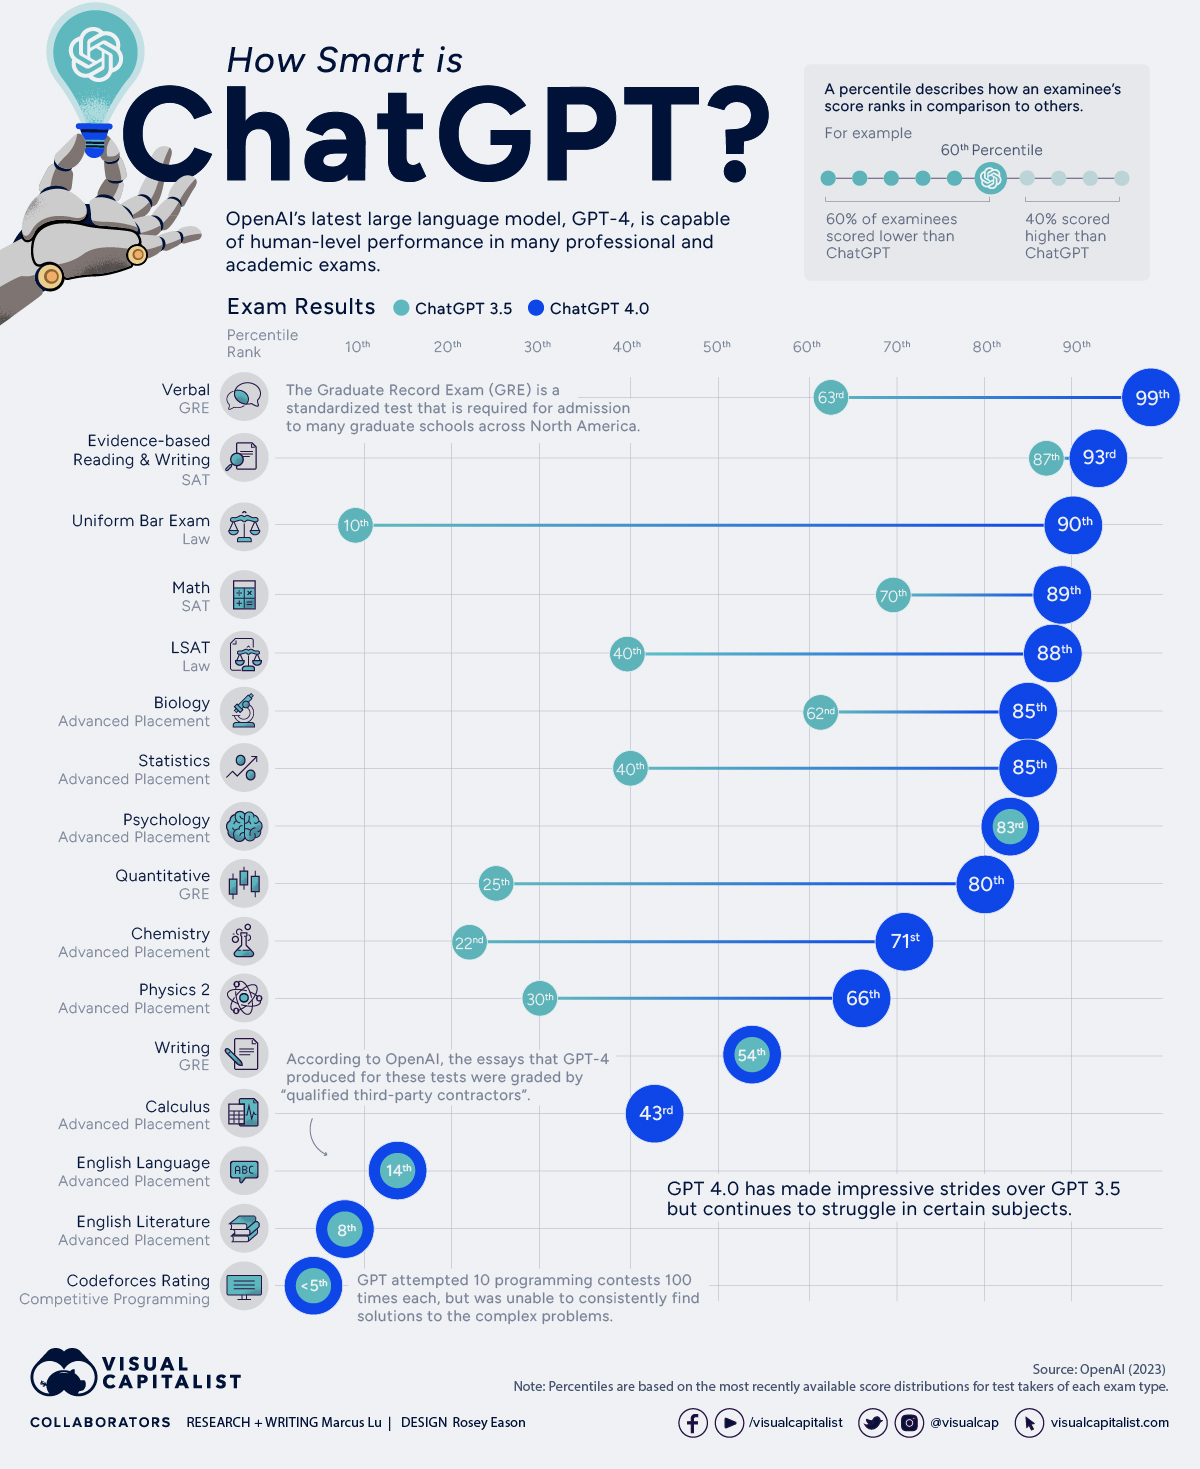 How smart is ChatGPT? We examine exam scores in this infographic